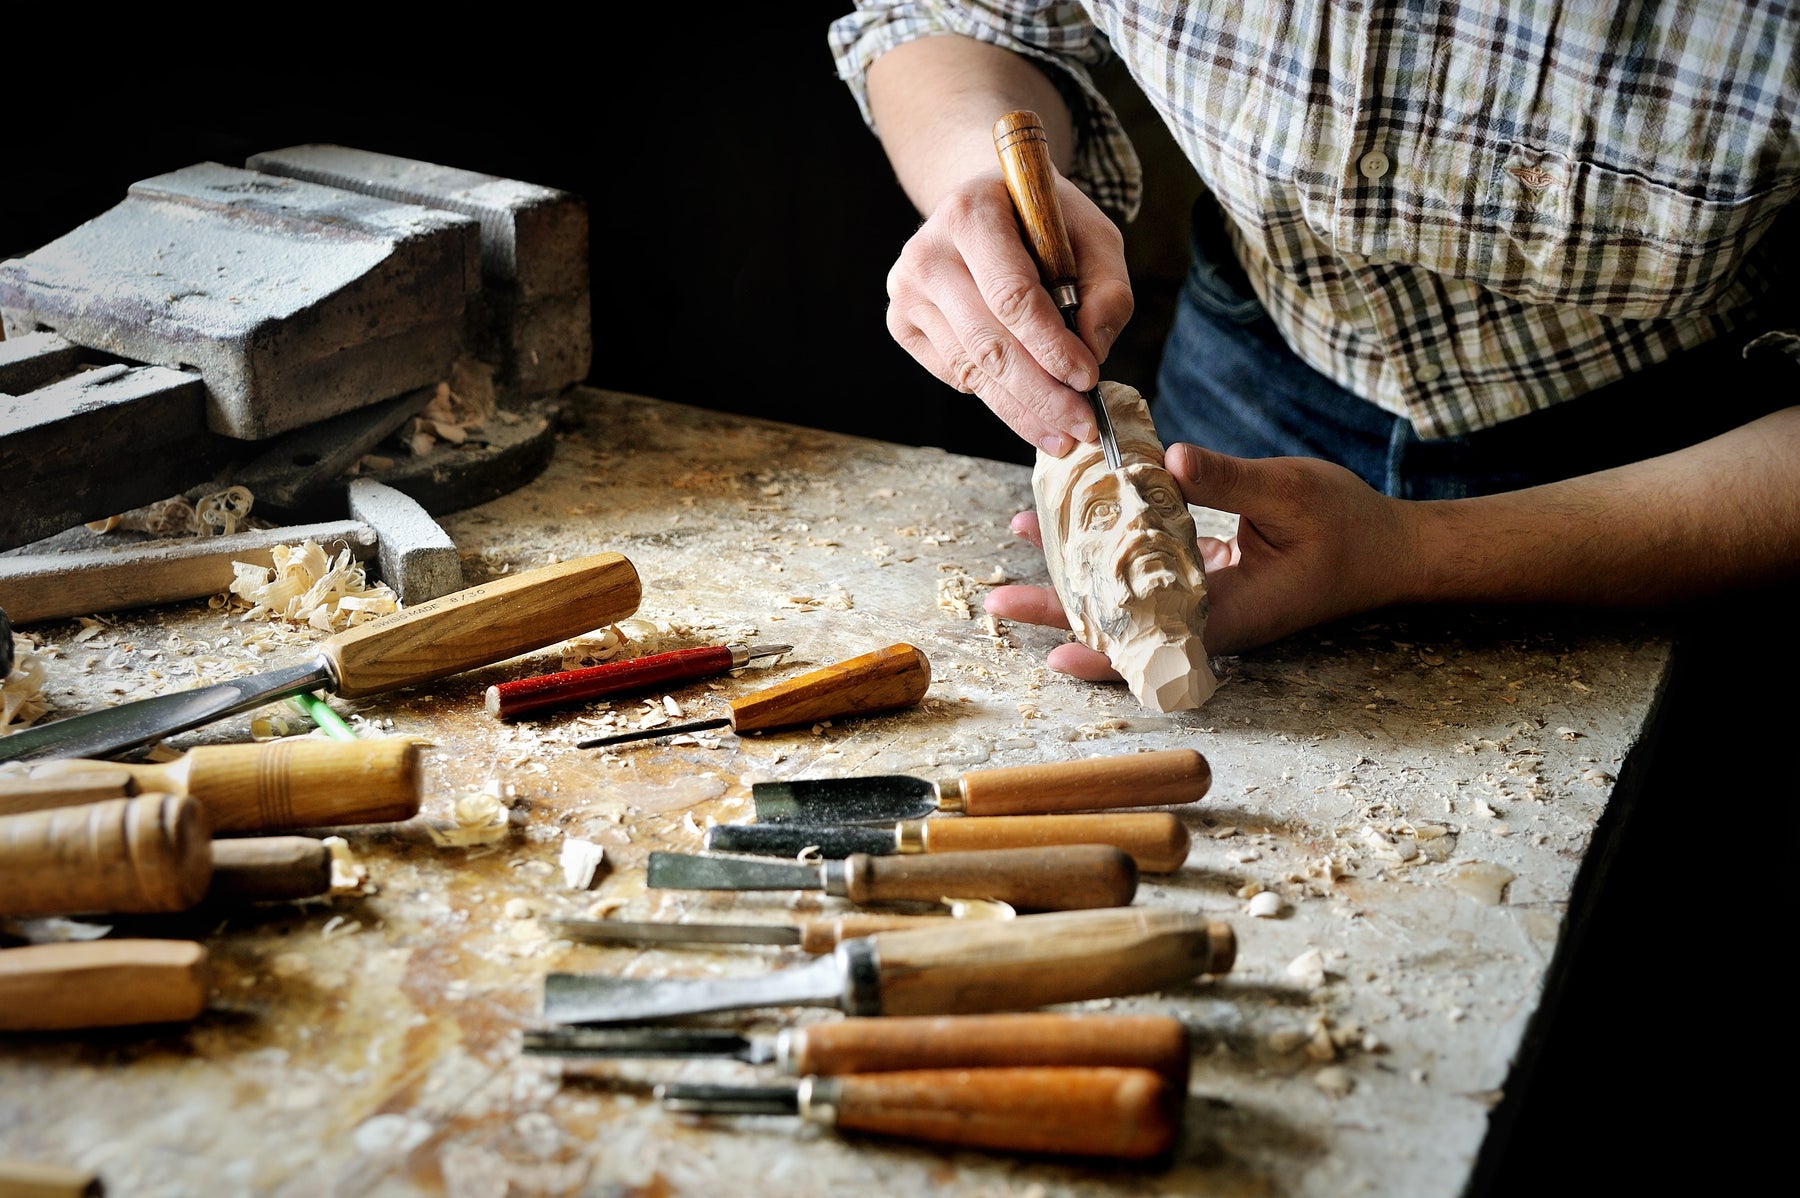 Sоmе оf the most essential wood carving tools include: gouge, cutting knife, mallets, coping saw and chisels.